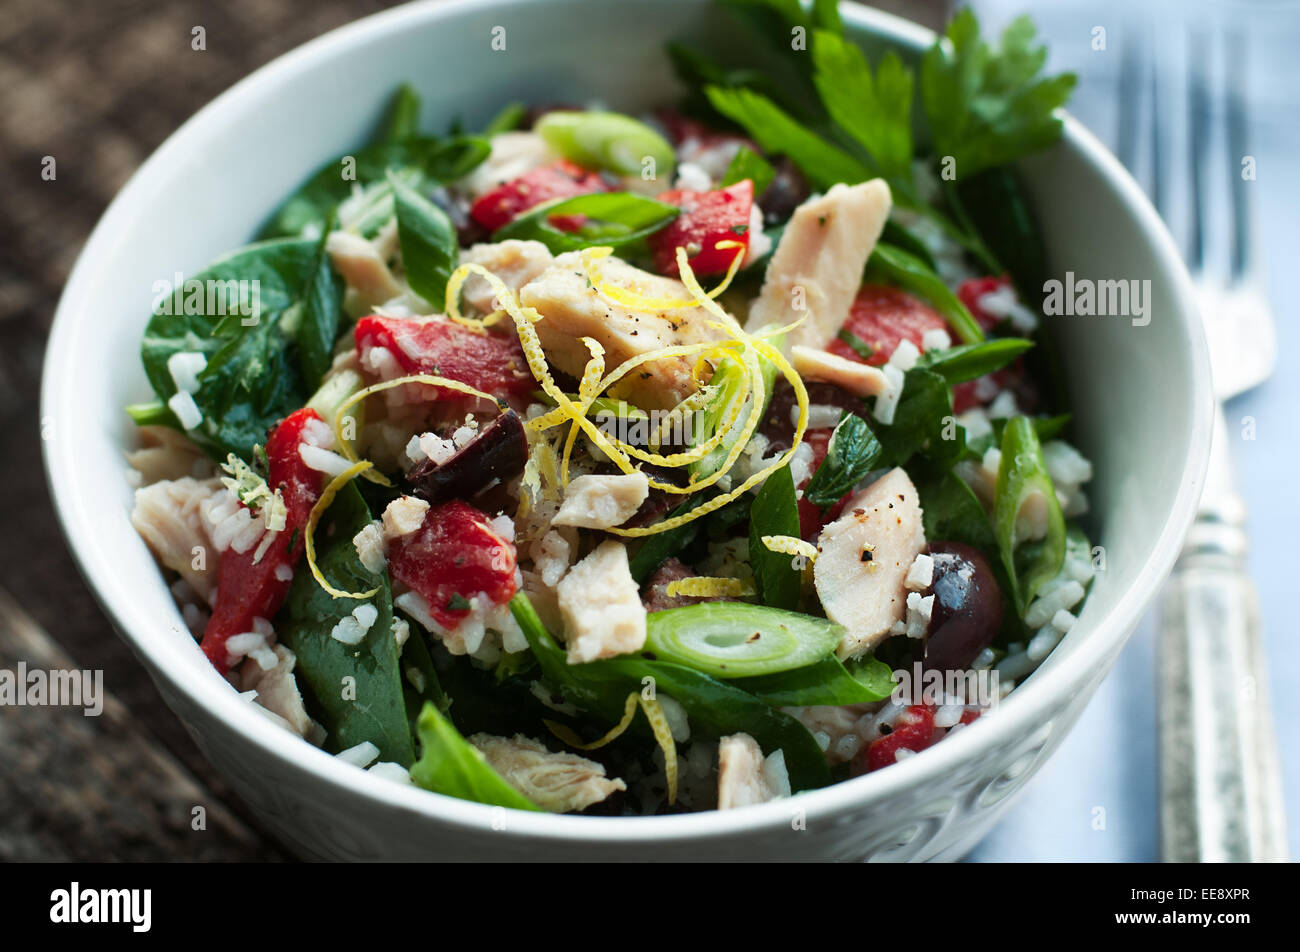 Albacore tuna salad with rice and vegetables Stock Photo